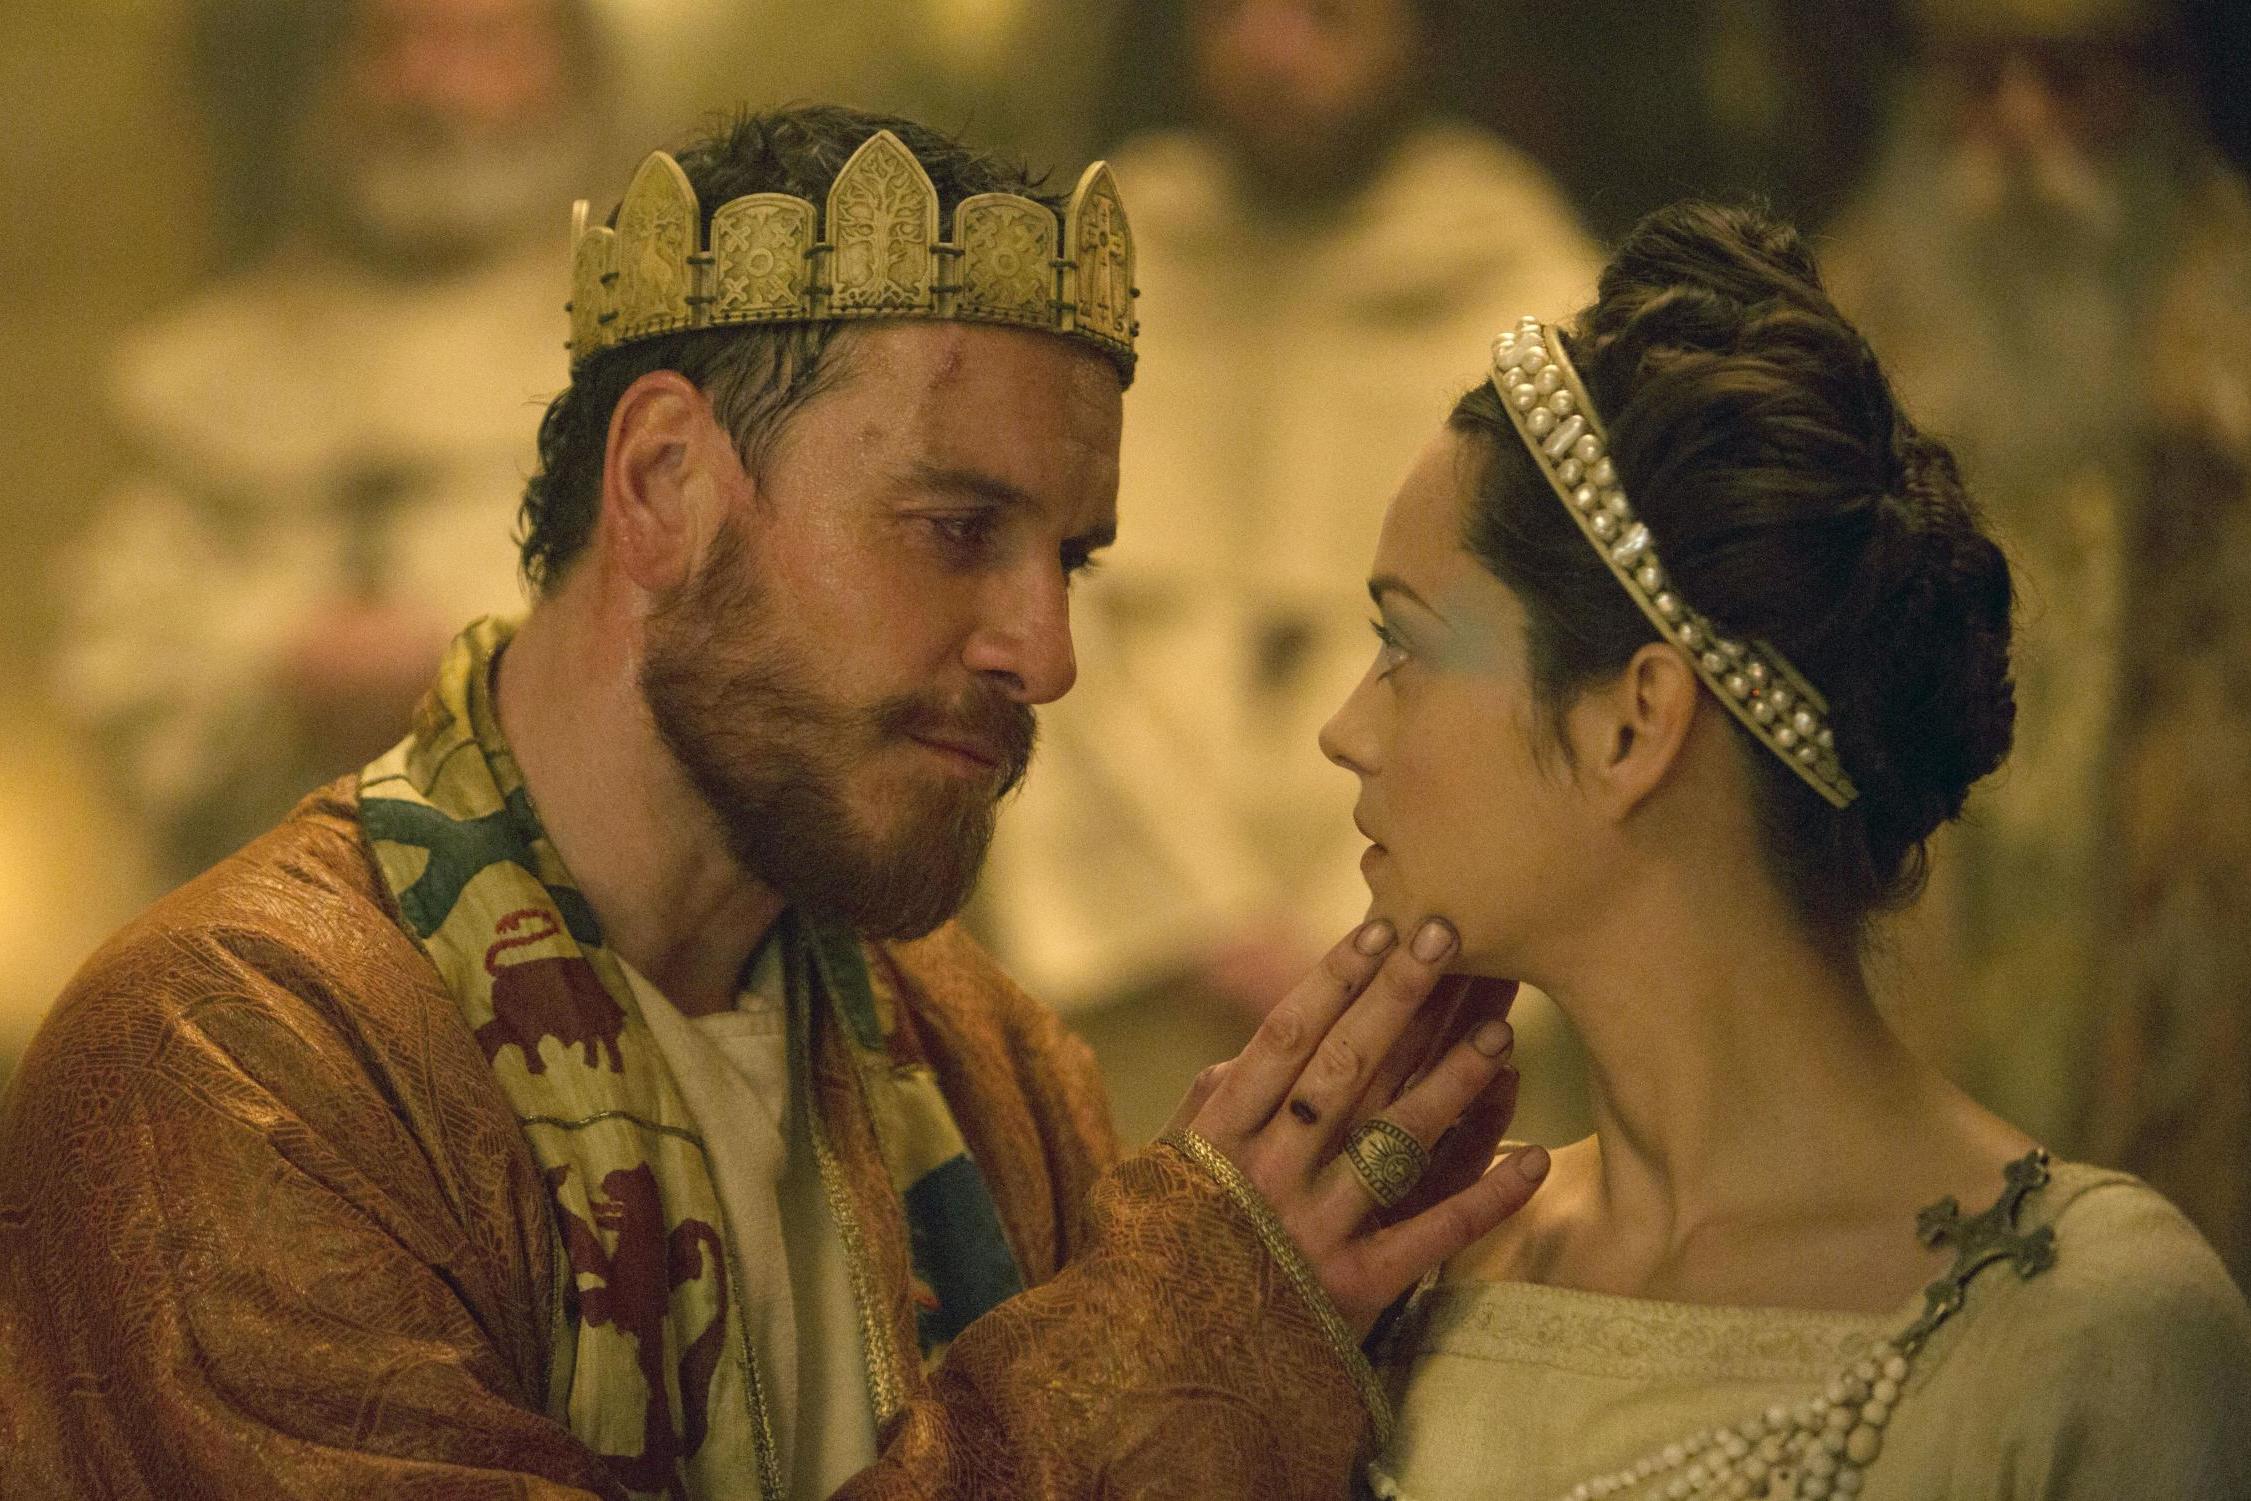 Michael Fassbender and Marion Cotillard as Macbeth and Lady Macbeth in the 2015 film adaptation